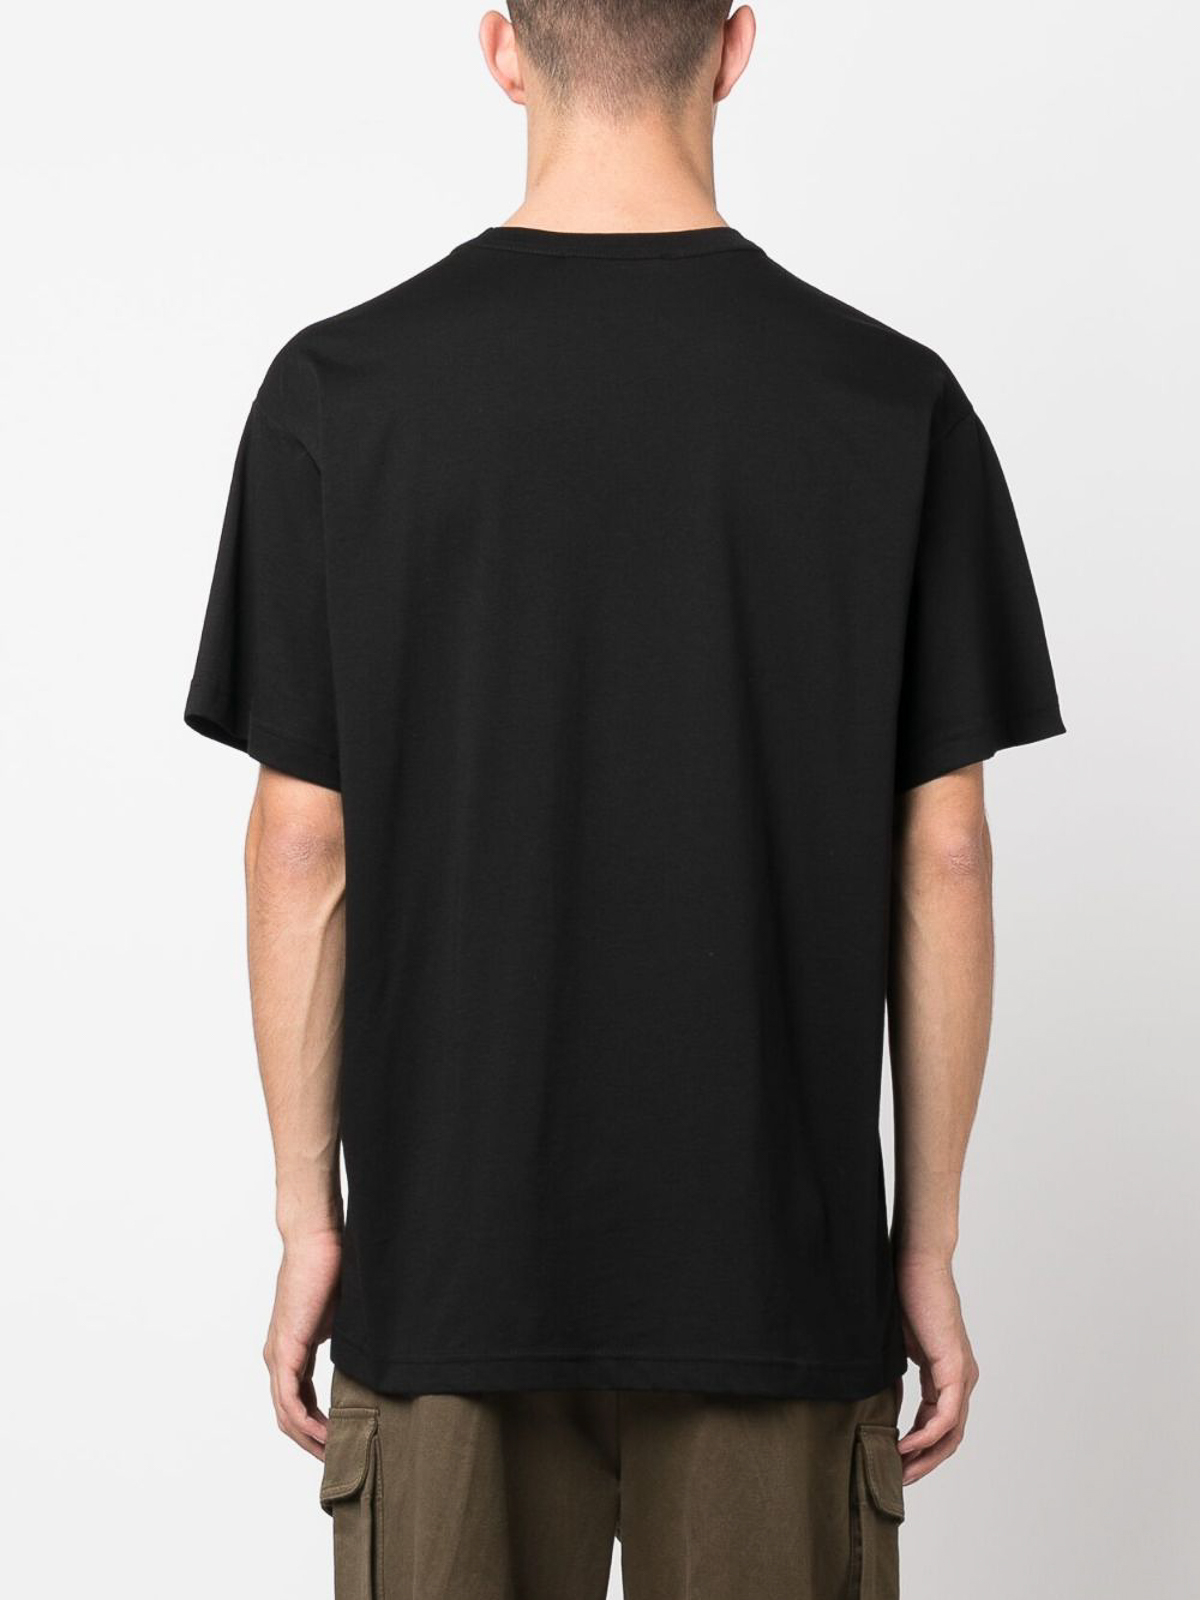 Shop Versace Jeans Couture Flocked Logo T-shirt In Black